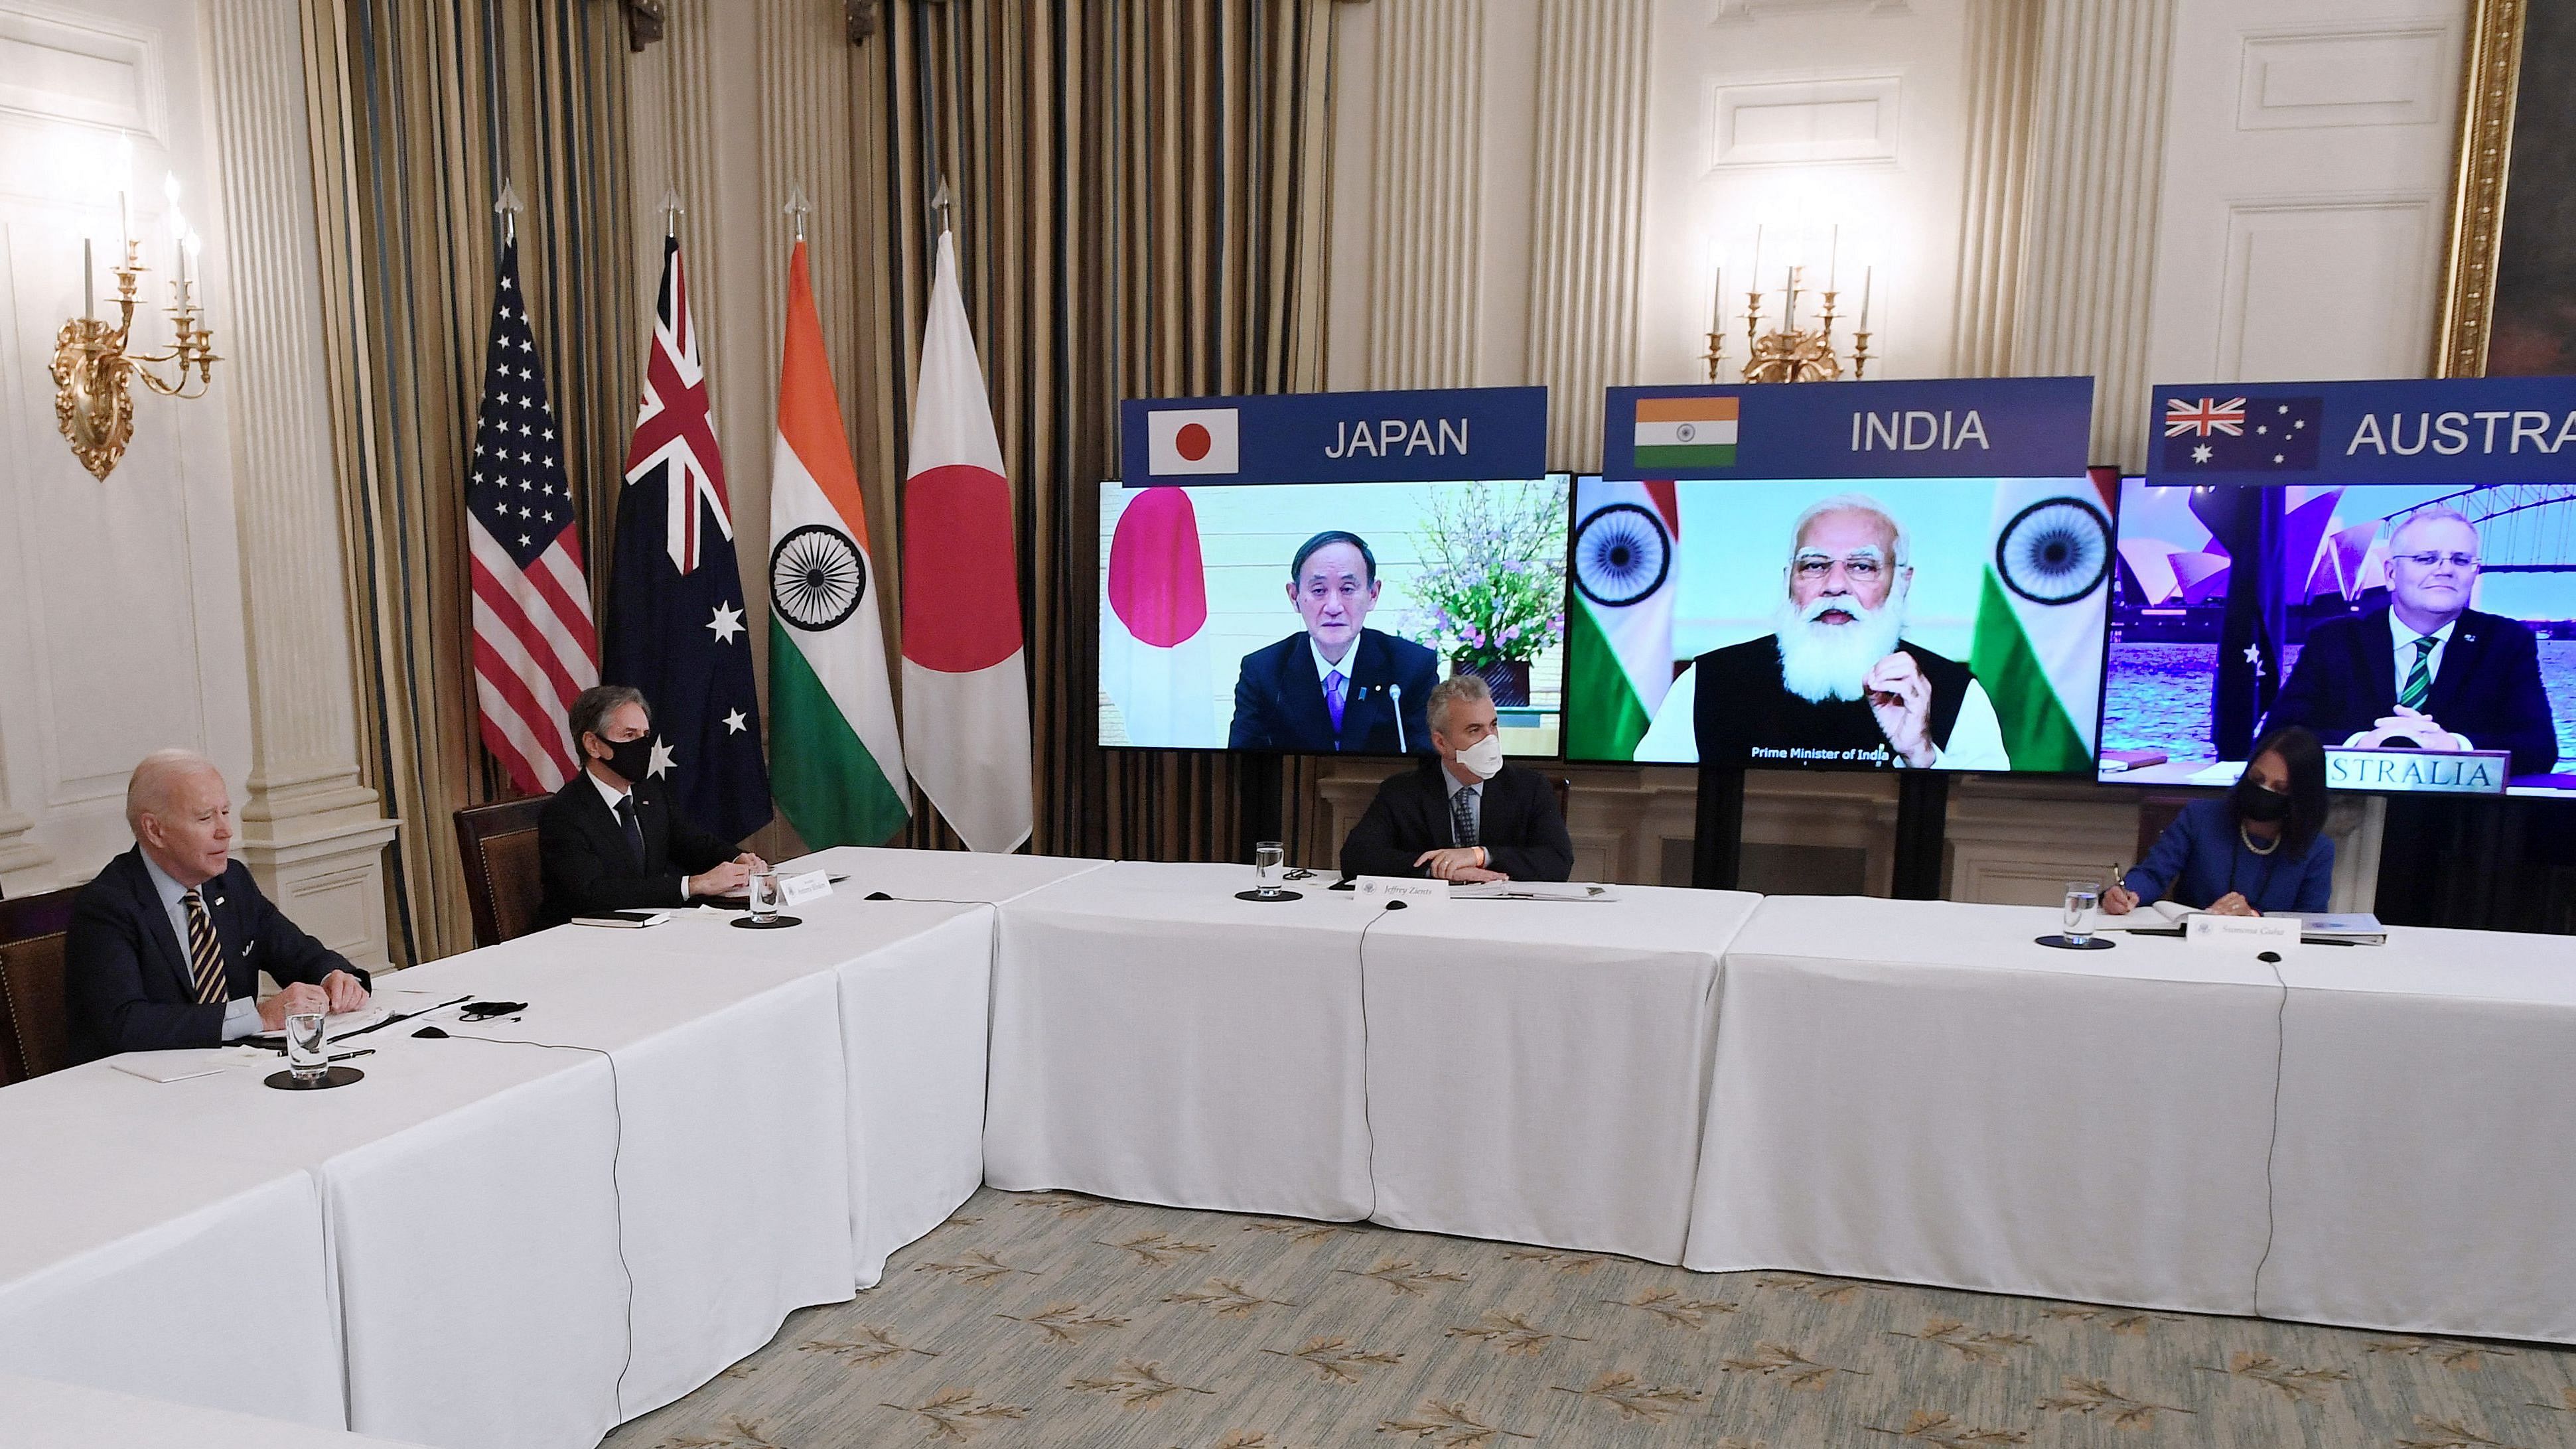 US President Joe Biden (L), with Secretary of State Antony Blinken (2nd L), meets virtually with members of the "Quad" alliance of Australia, India, Japan and the US, in the State Dining Room of the White House in Washington, DC, on March 12, 2021. Credit: AFP File Photo